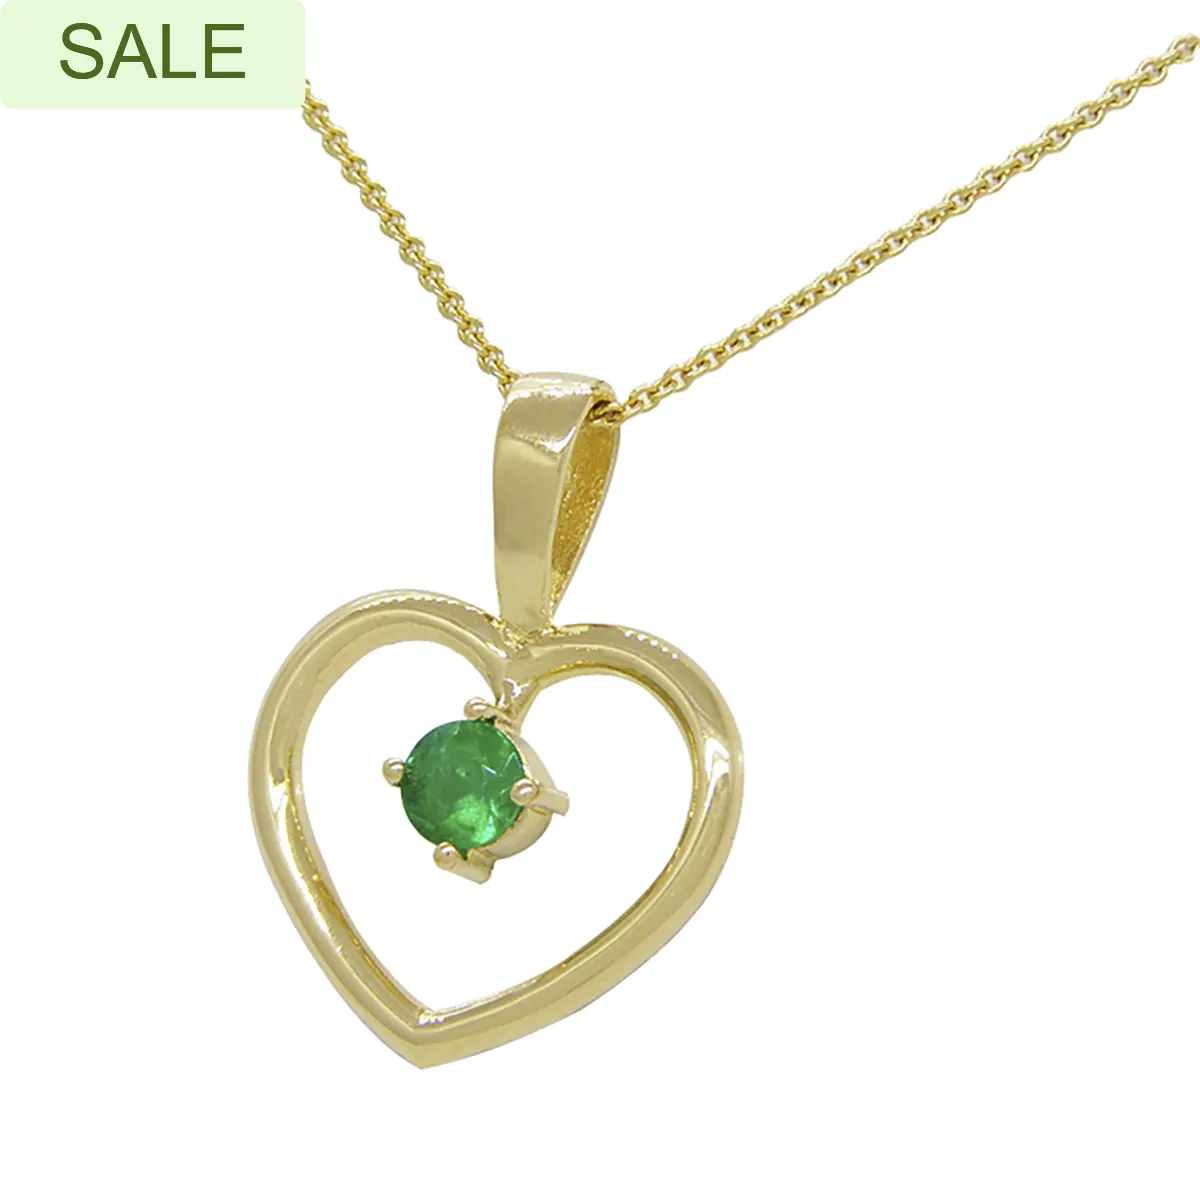 18K Yellow Gold Heart Shape Emerald Pendant with 0.22 Ct. Round Cut Emerald